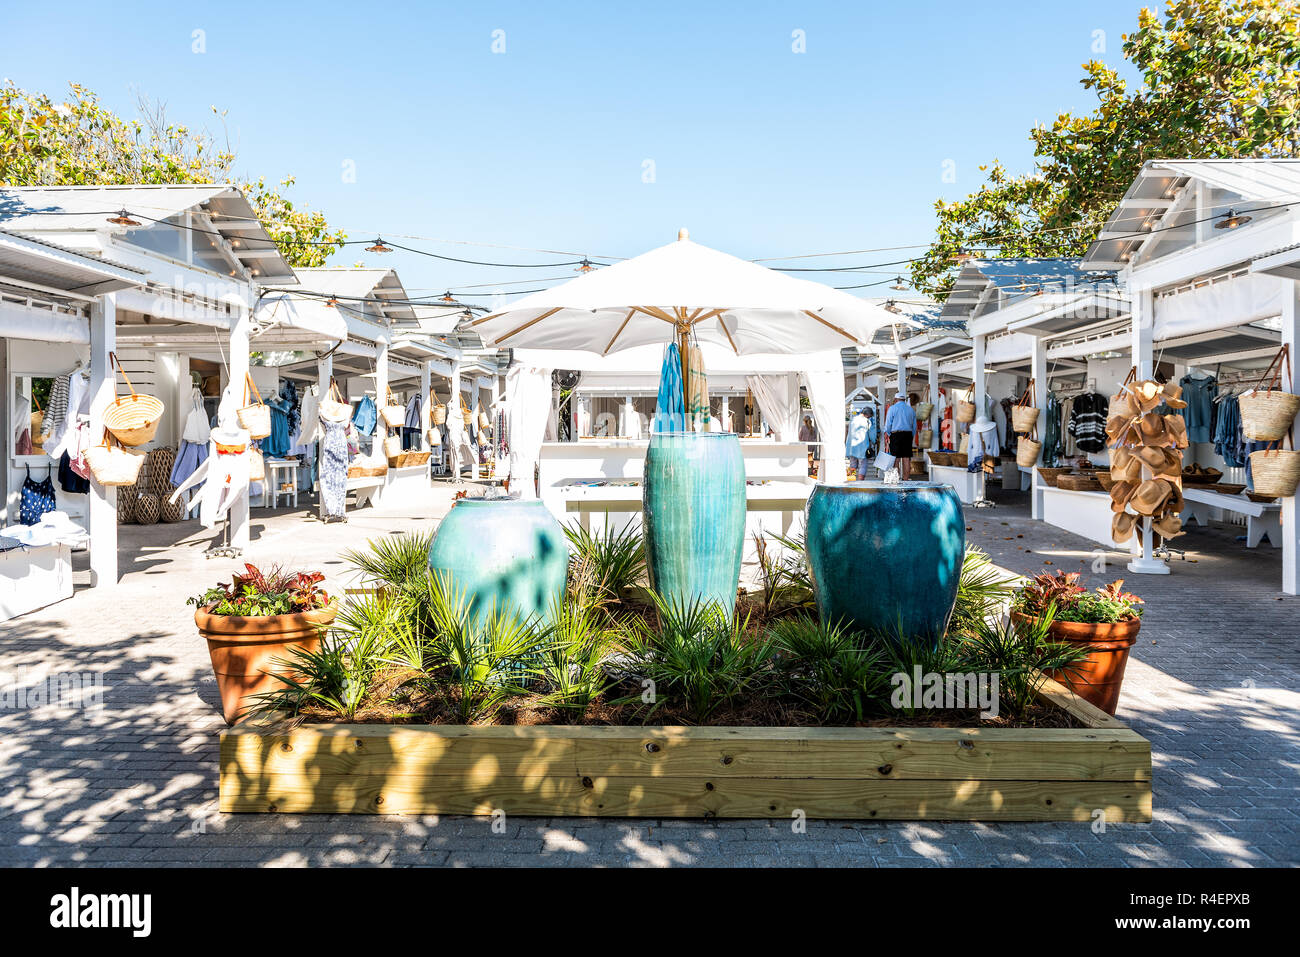 Seaside, USA - April 25, 2018: Shopping mall, outdoor market park square center in historic city town beach village during sunny day in Florida panhan Stock Photo